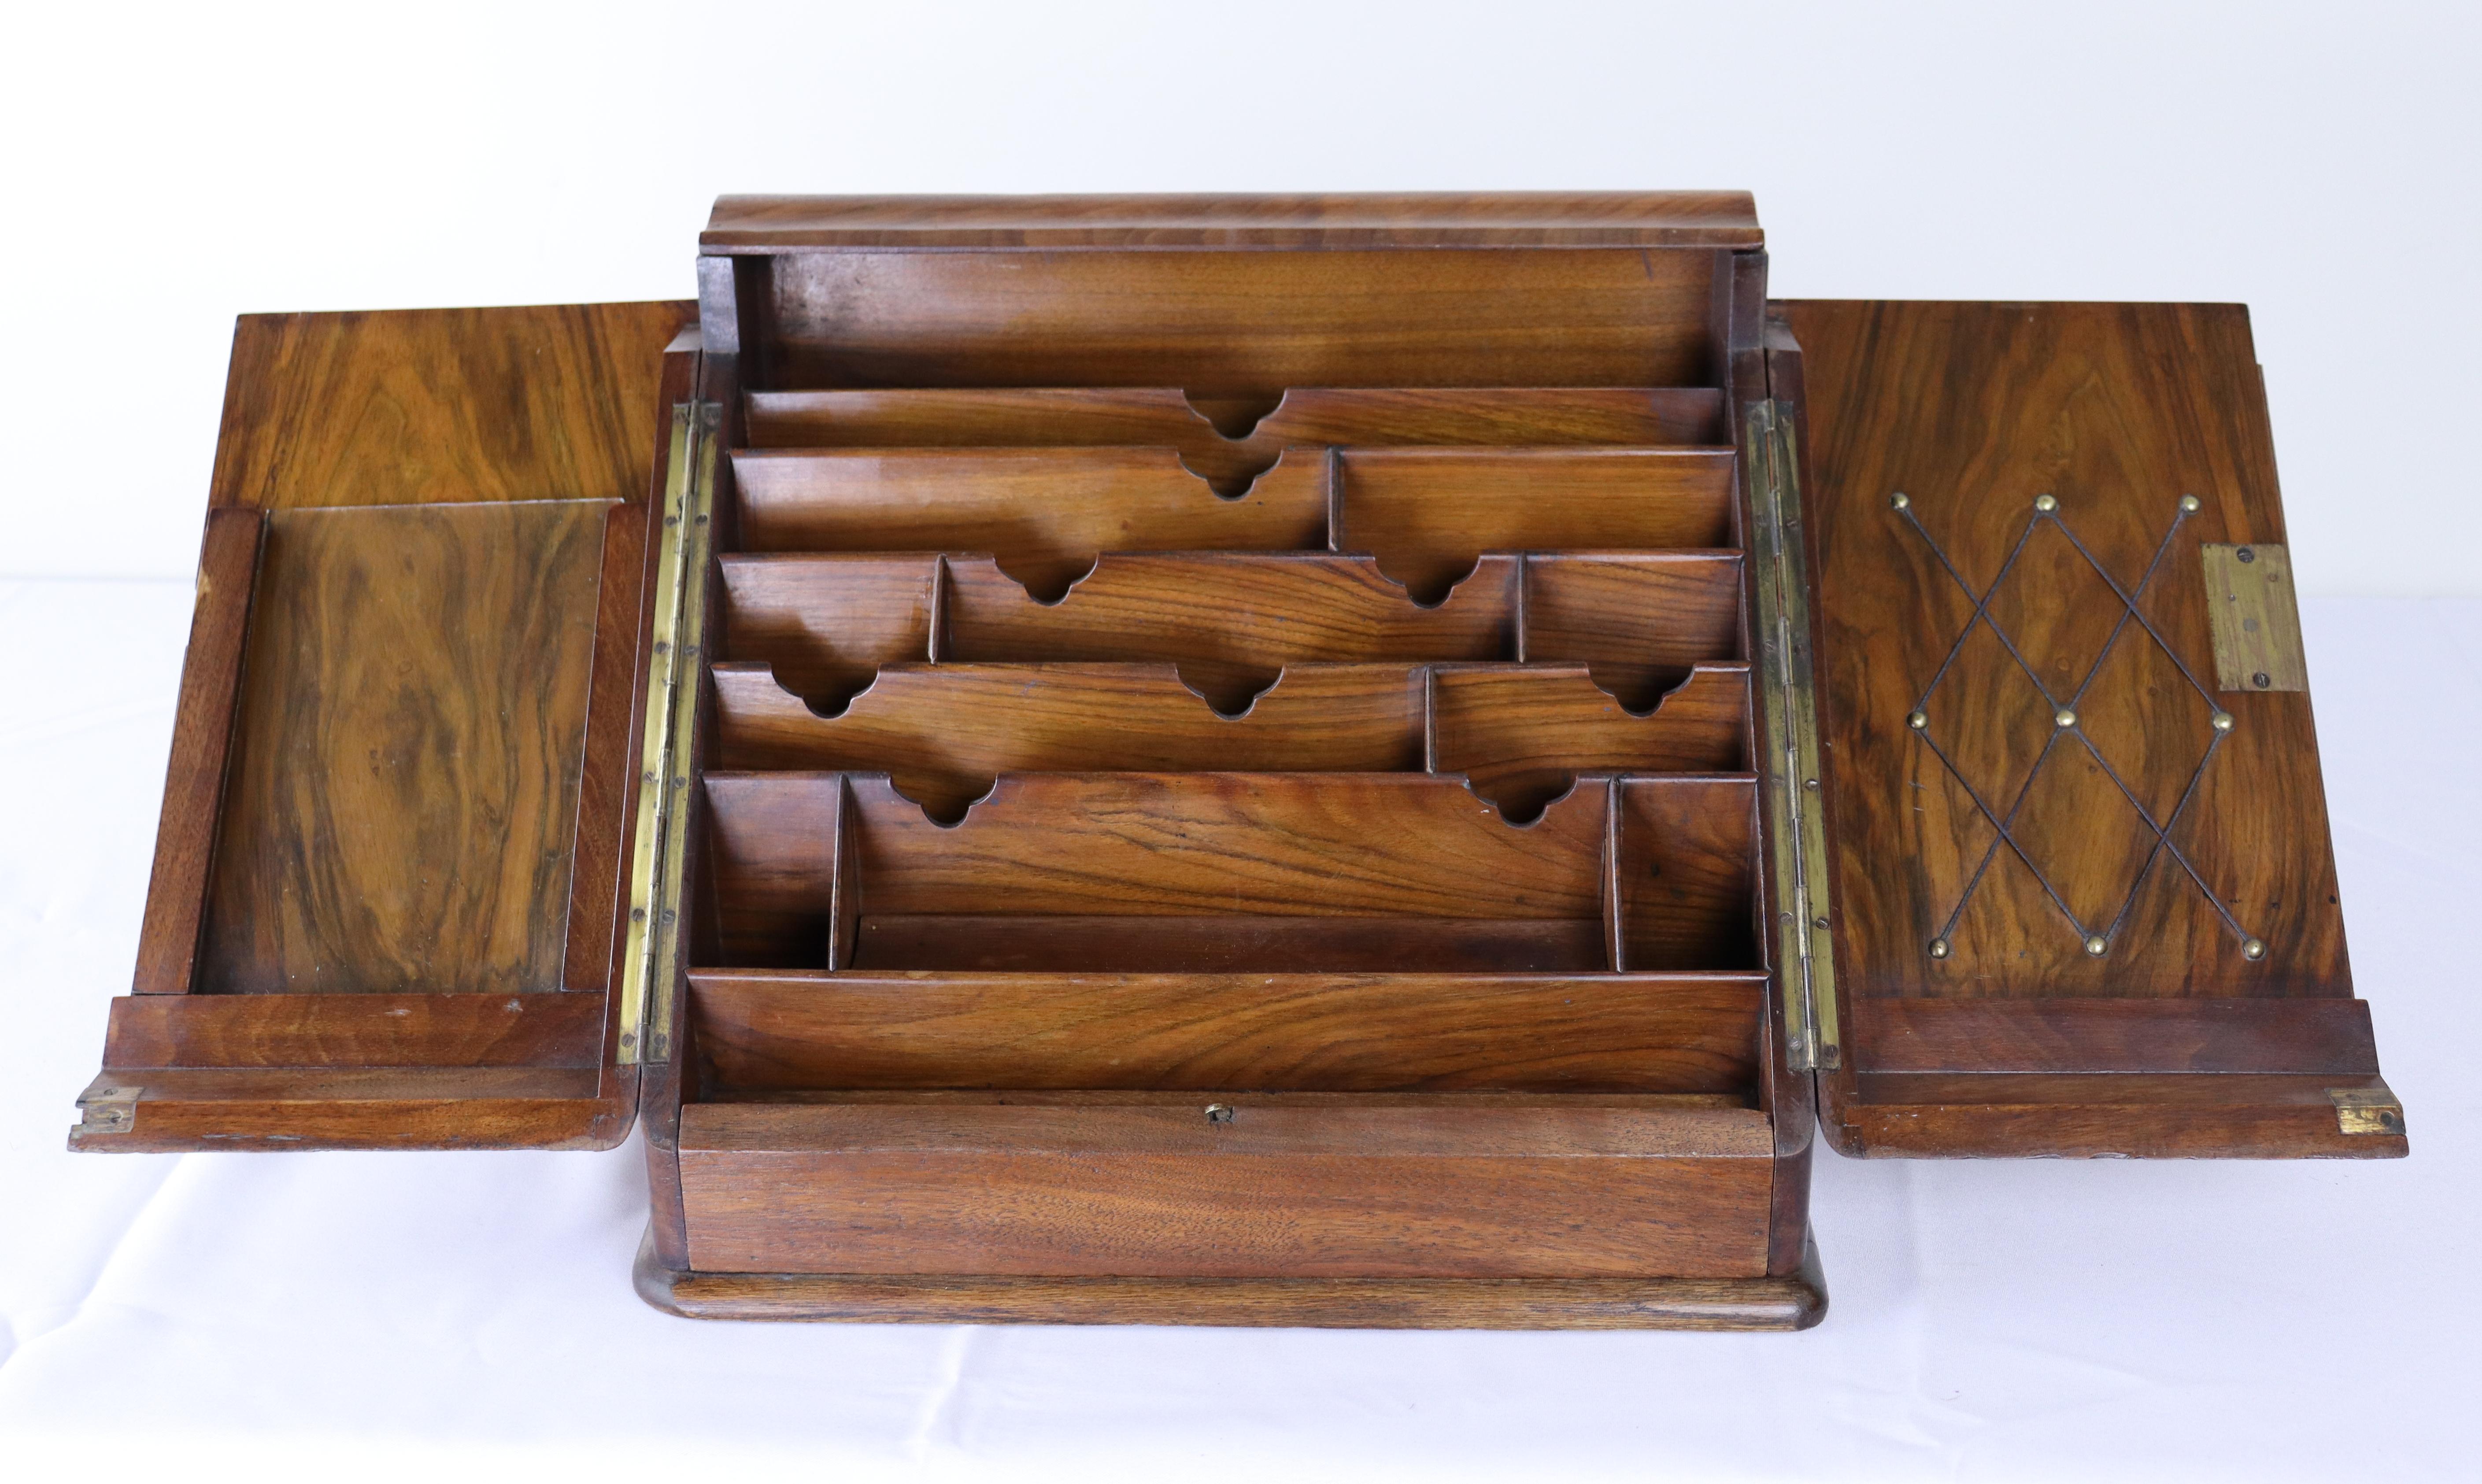 An antique English letters cabinet or rack, or home office desk organizer.  Fashioned in gorgeous walnut with good grain and patina.  Small drawer at the base adds to the utlity of the piece, which has three separate areas for organizing paperwork. 